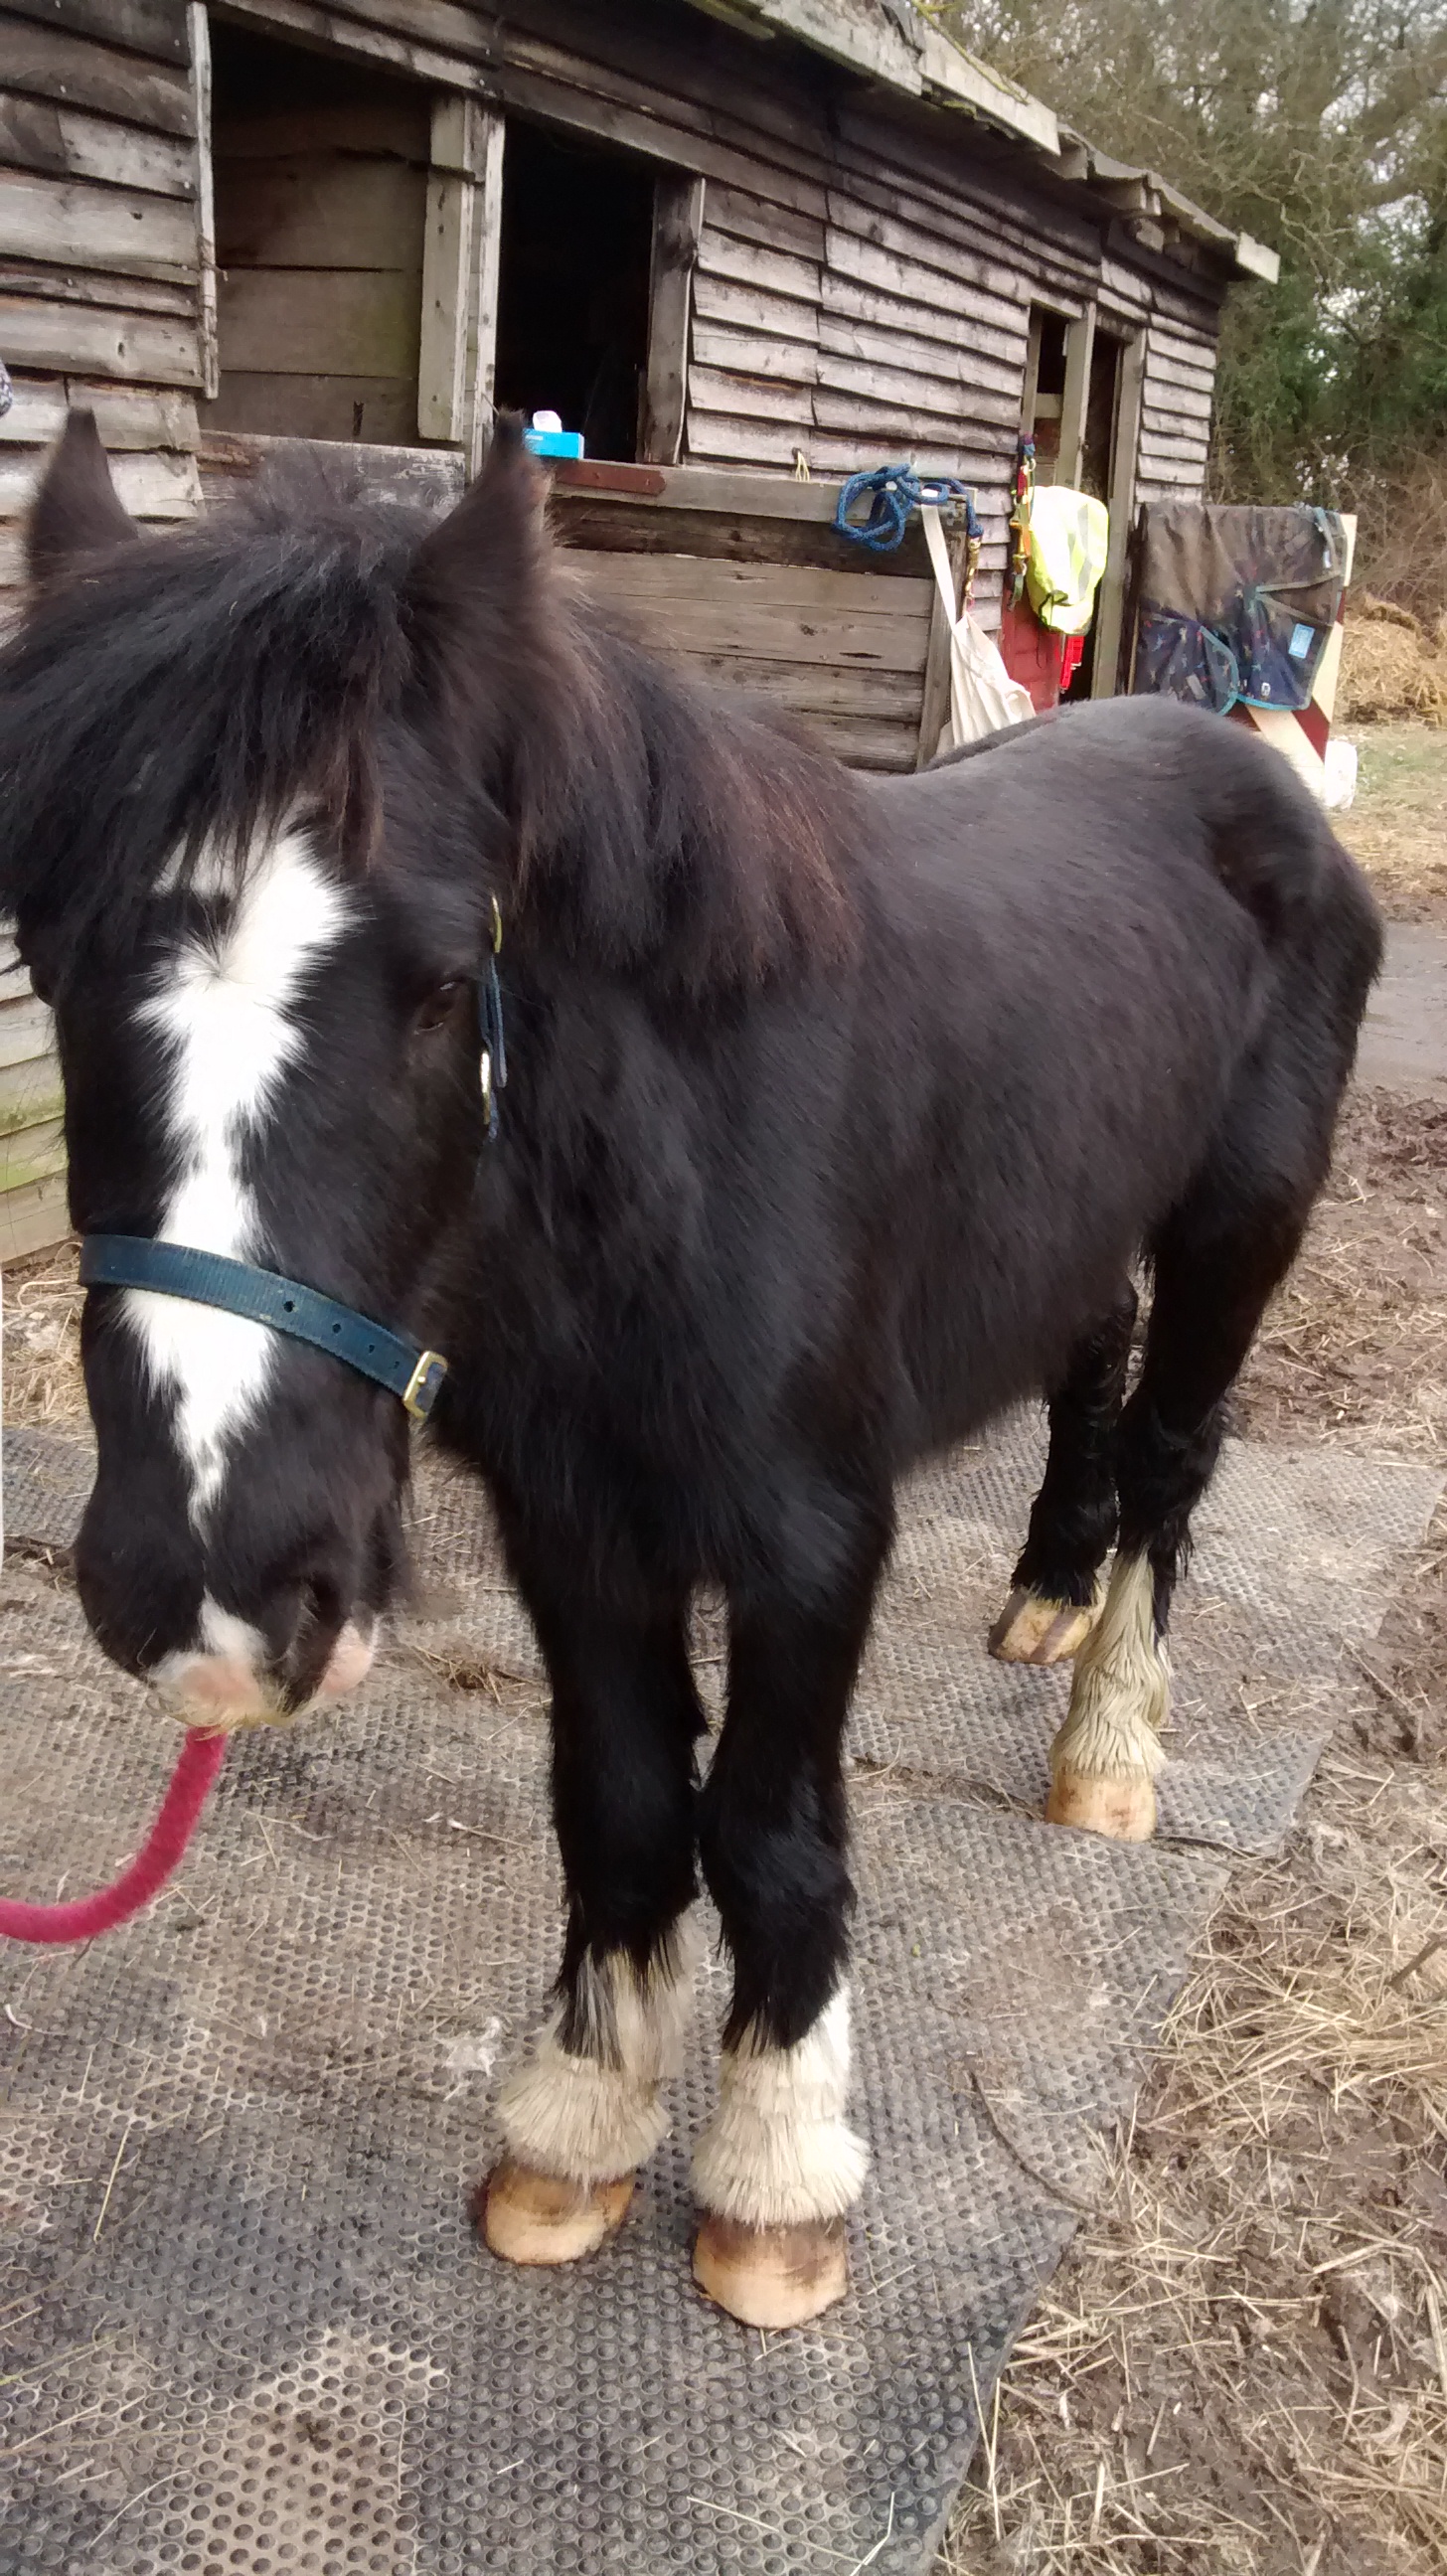 Foal Blackjack - RSPCA is investigating how horse came to be in bad way